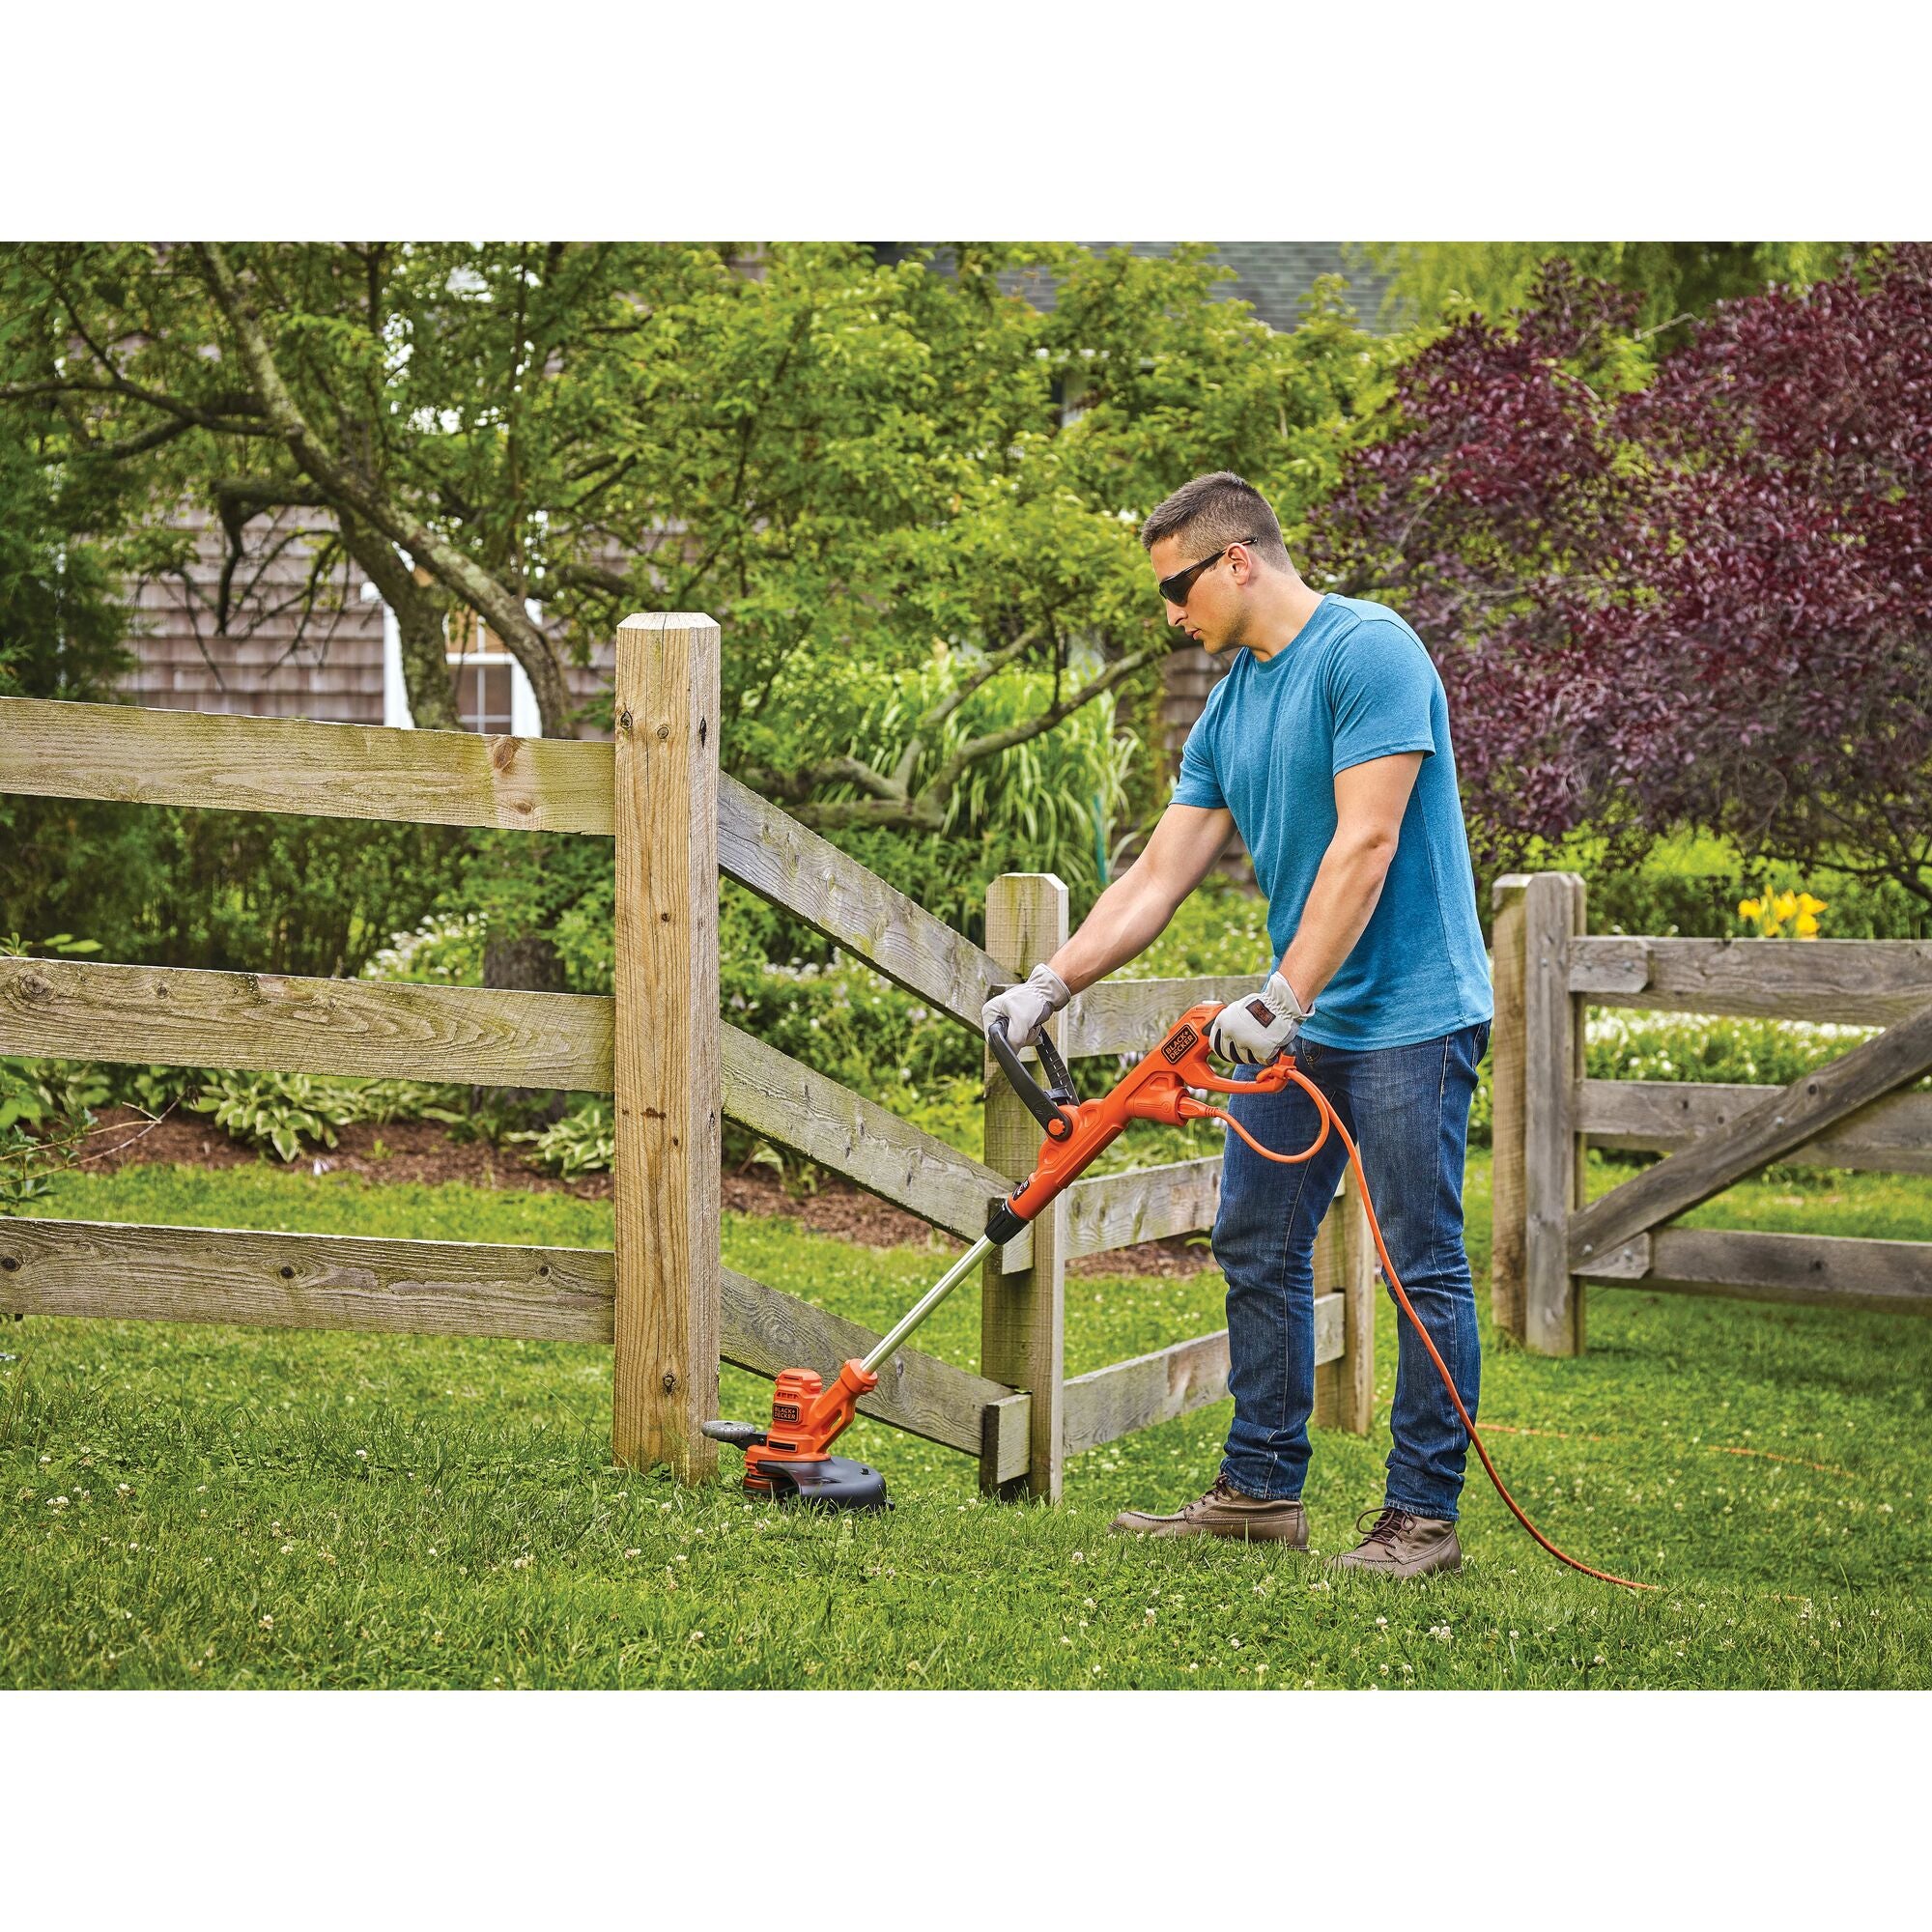 Black & Decker Power Select Function String Trimmers